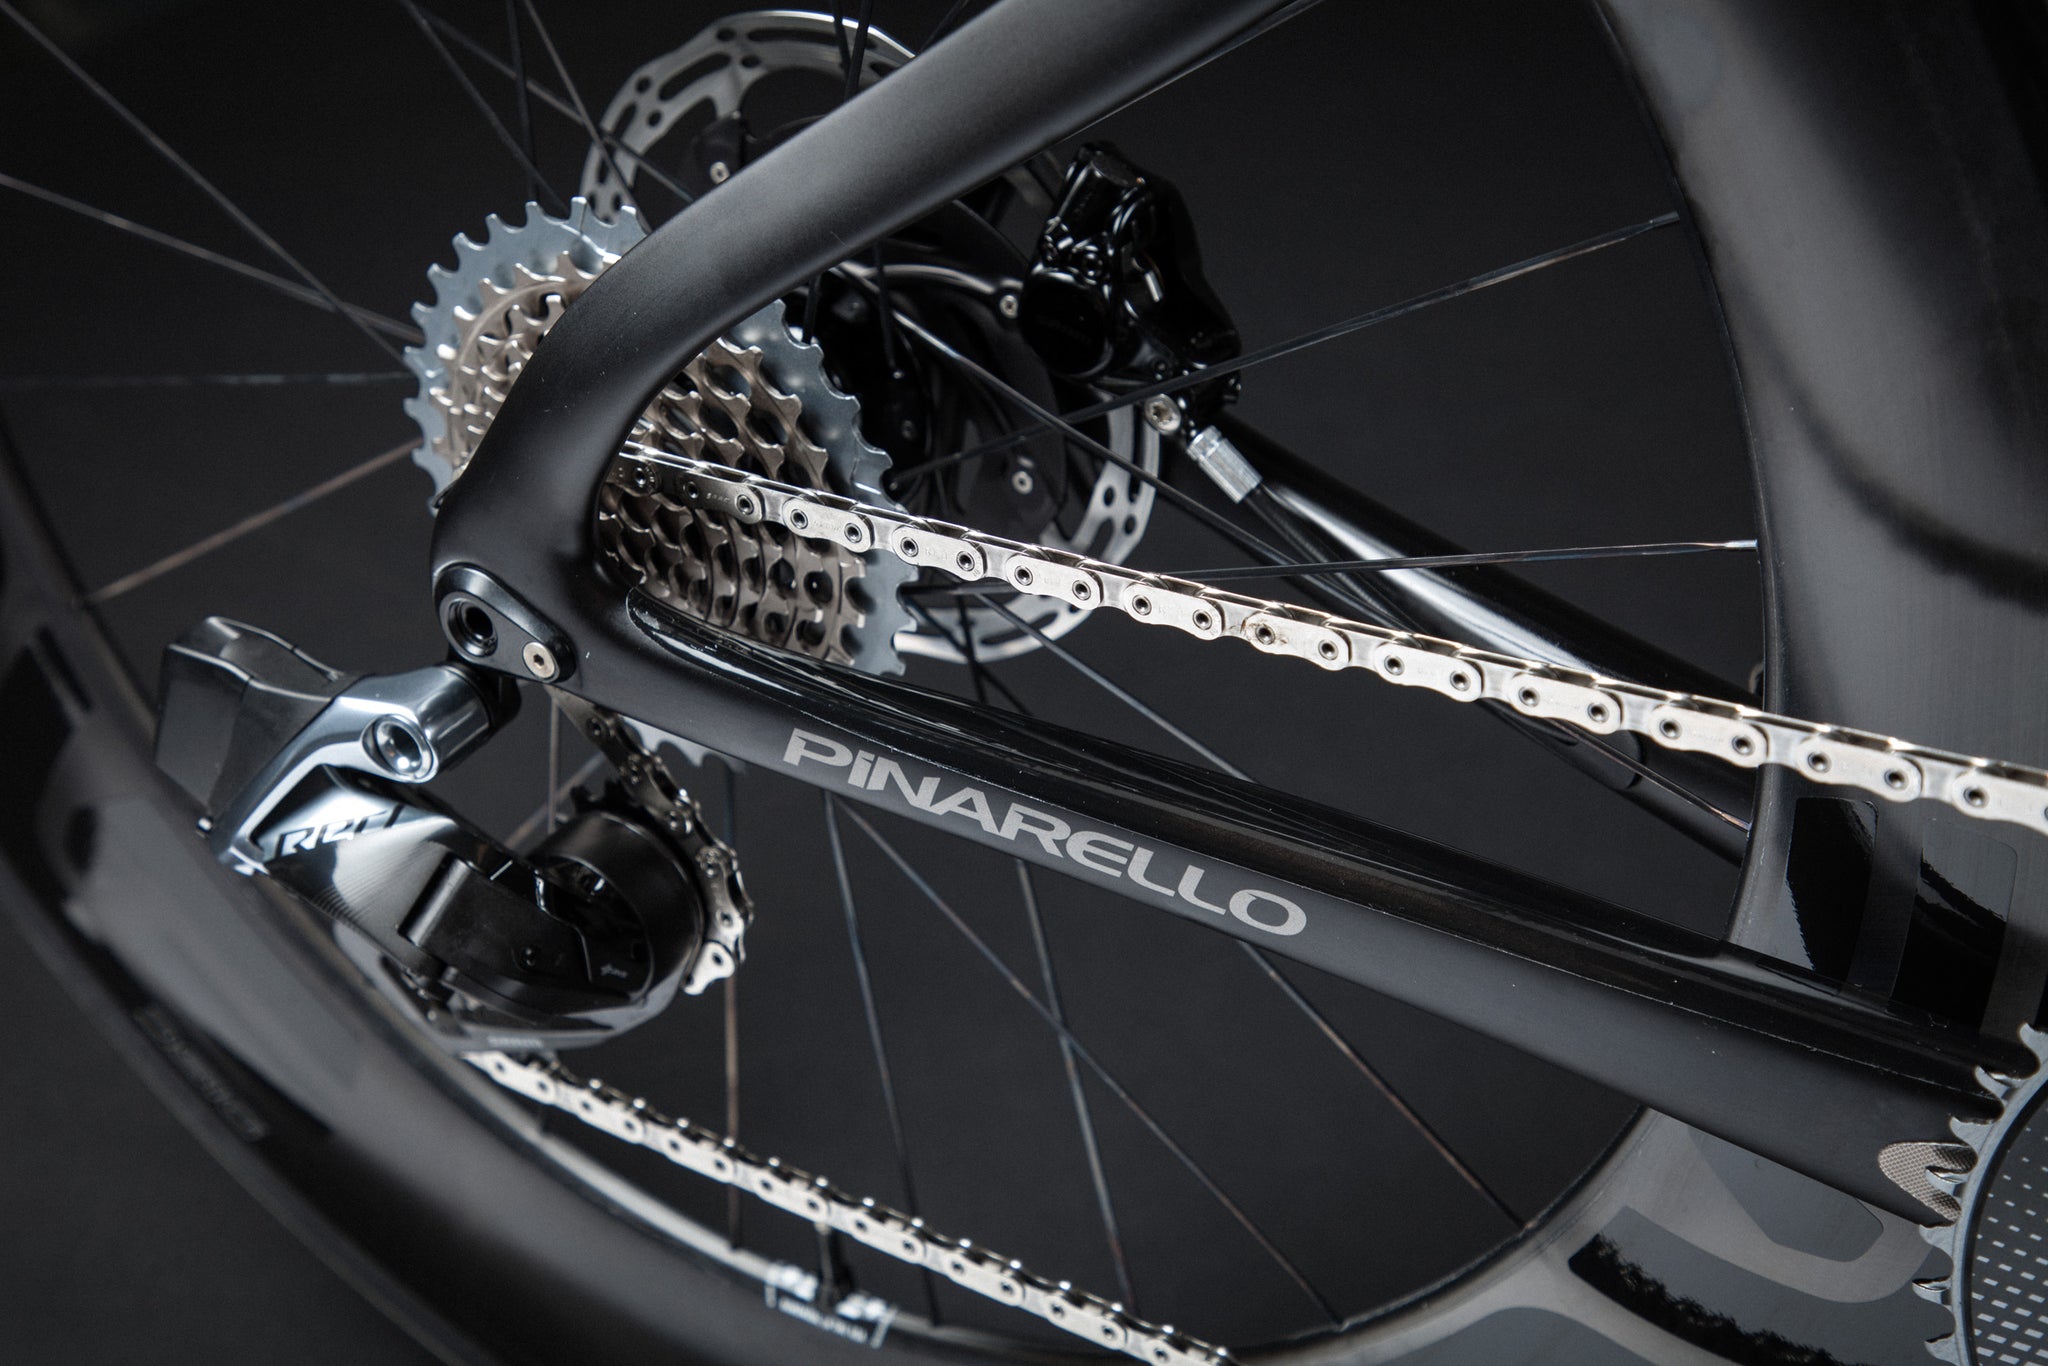 A Blacked Out Pinarello Bolide Gallery chainstay